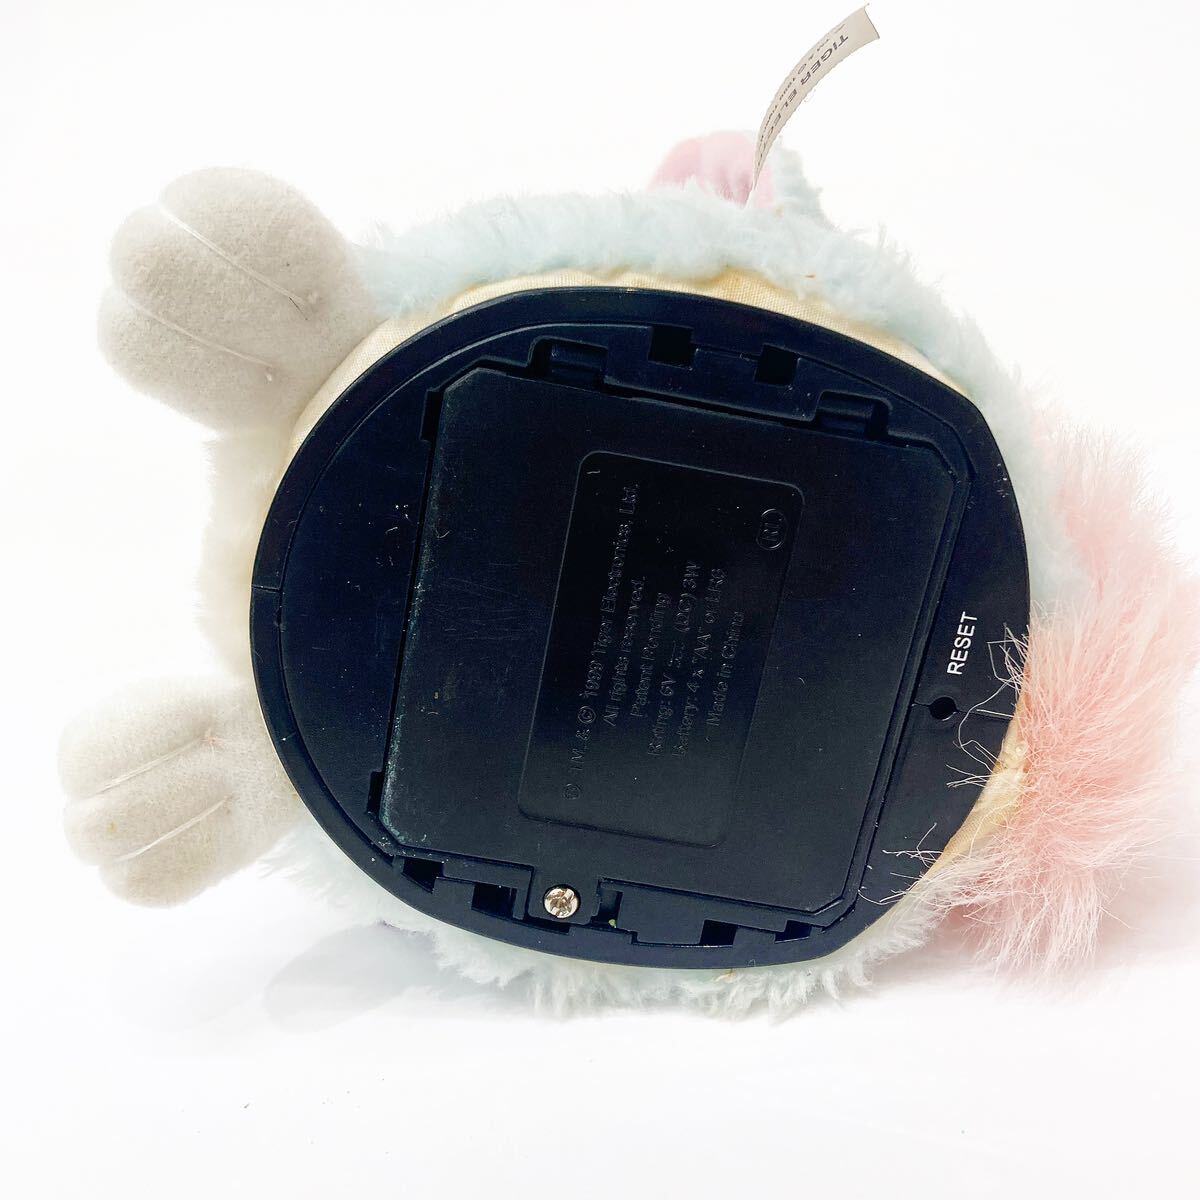  operation goods TOMY Furby Tommy Furby Bay Be virtual pet 1999 year Japanese edition toy toy that time thing alp old 0304